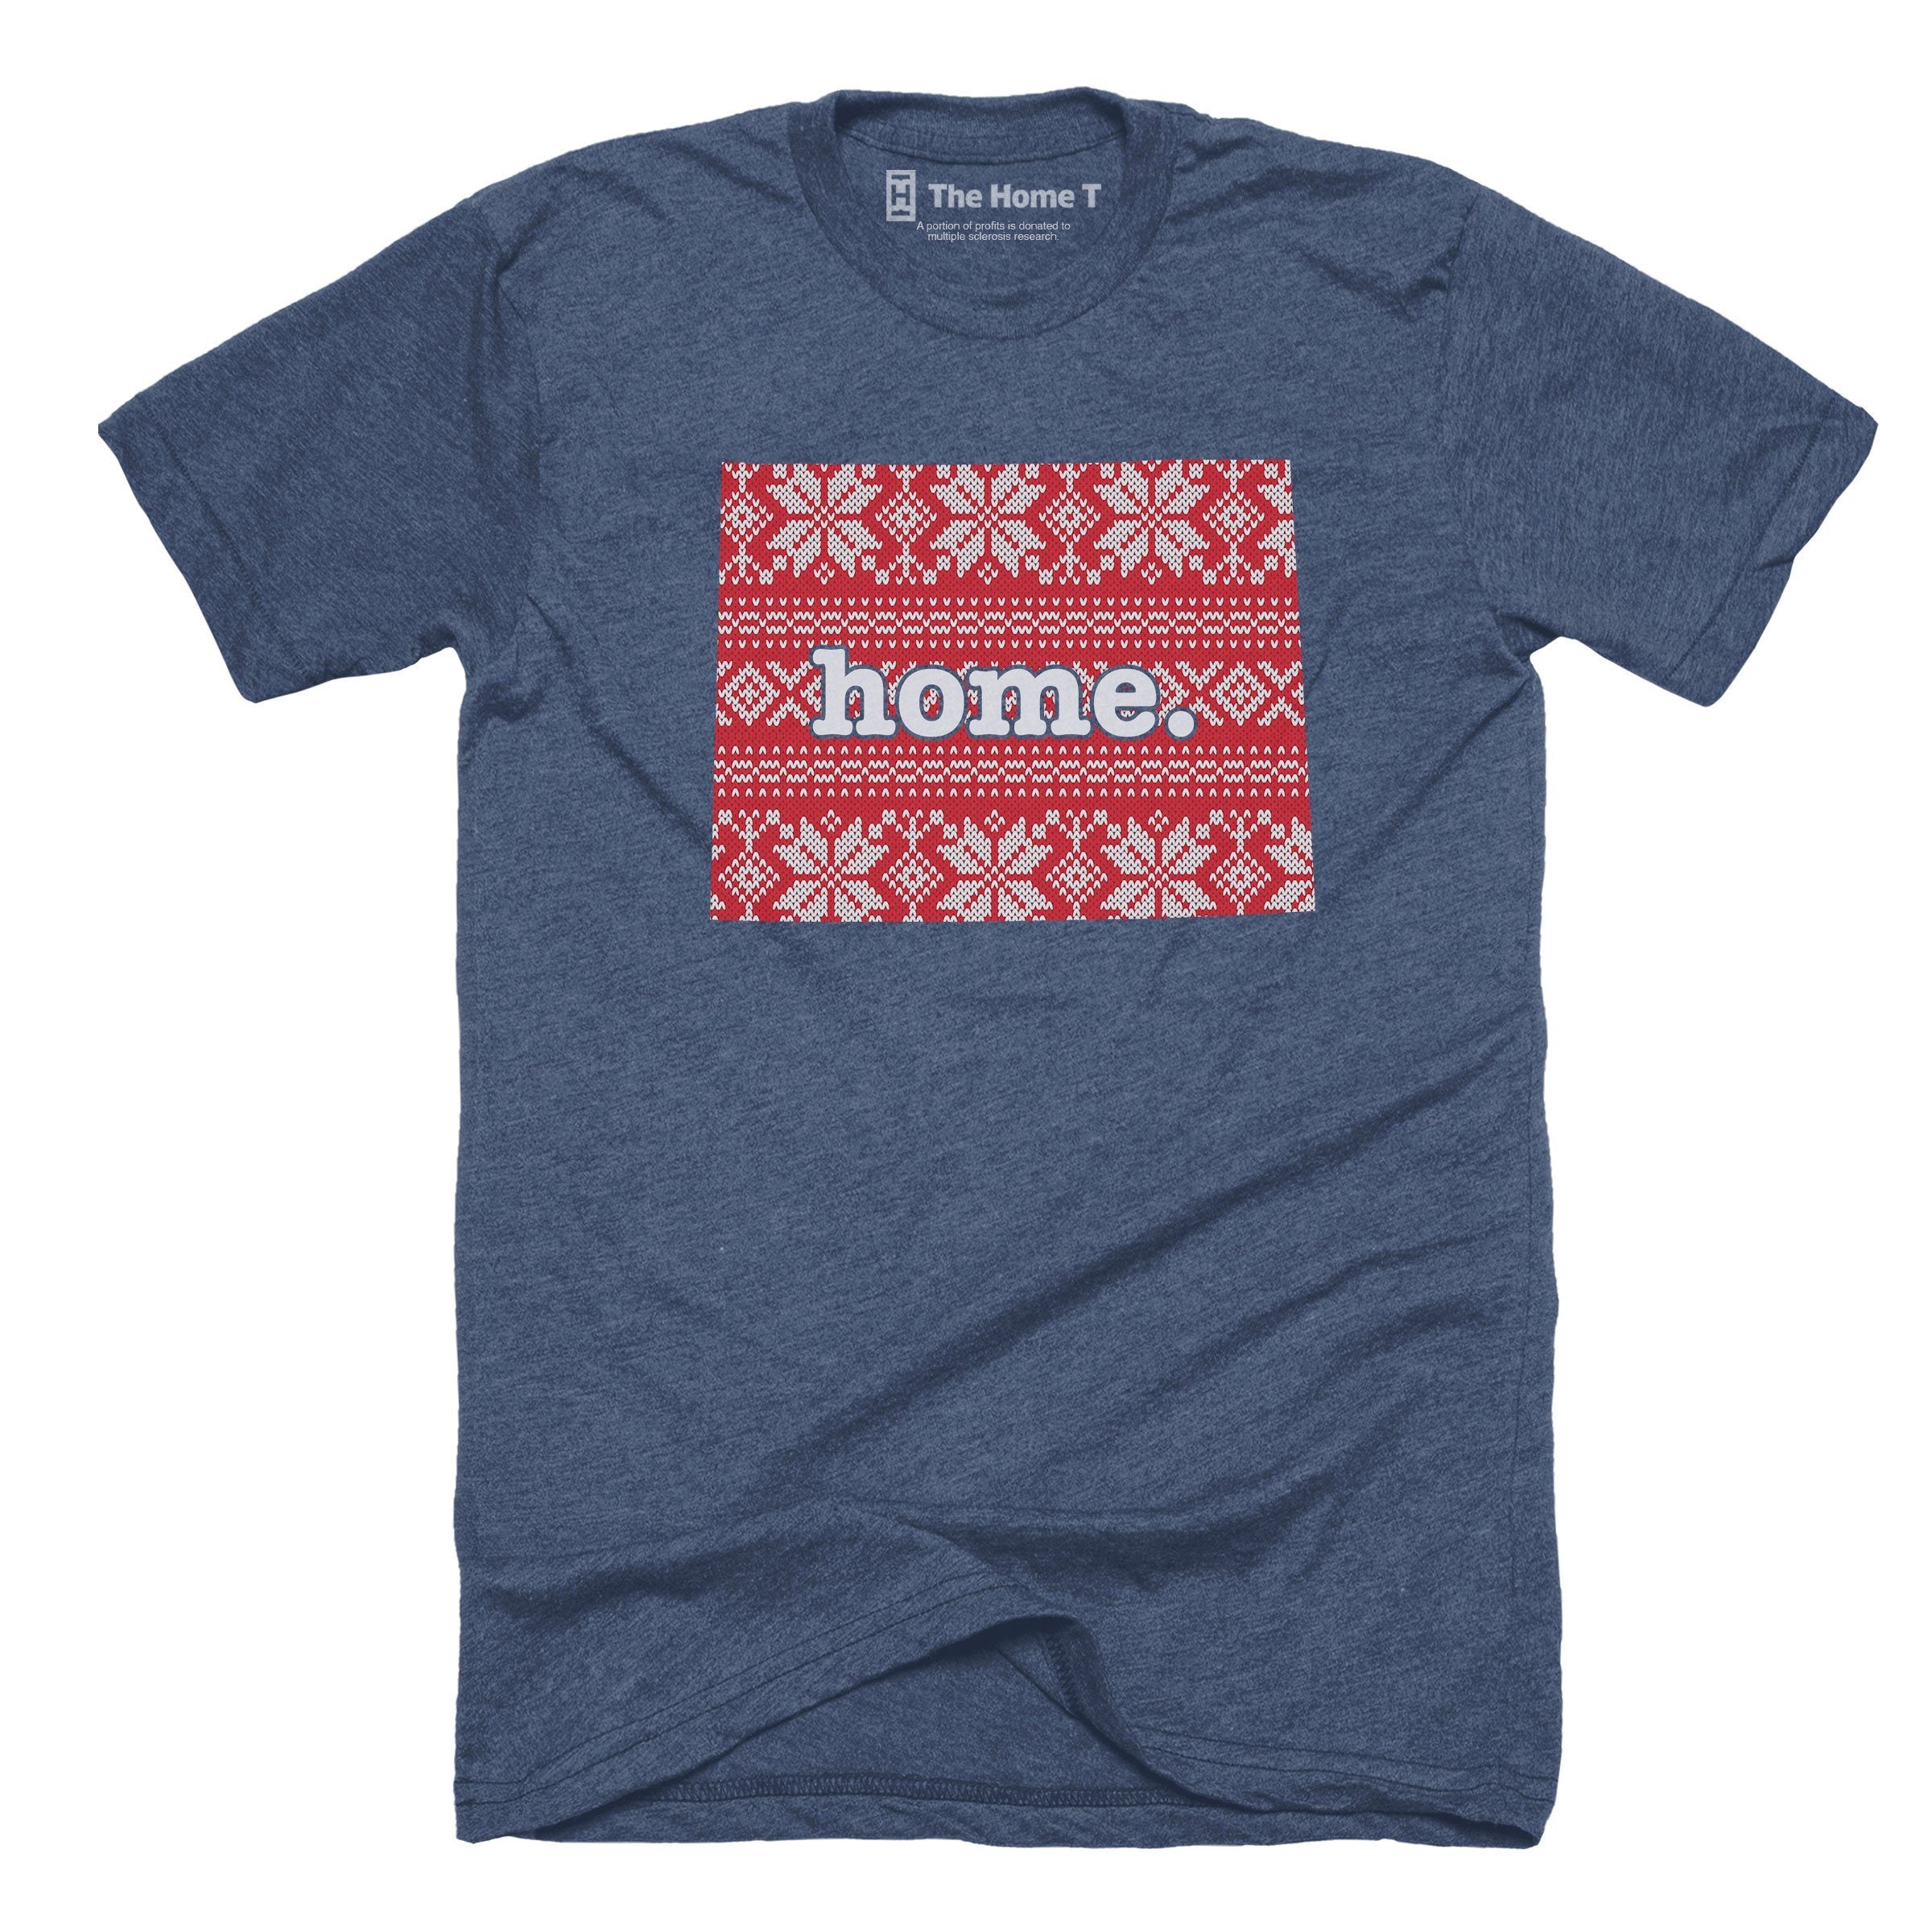 Wyoming Christmas Sweater Pattern Christmas Sweater The Home T XS Navy T-Shirt